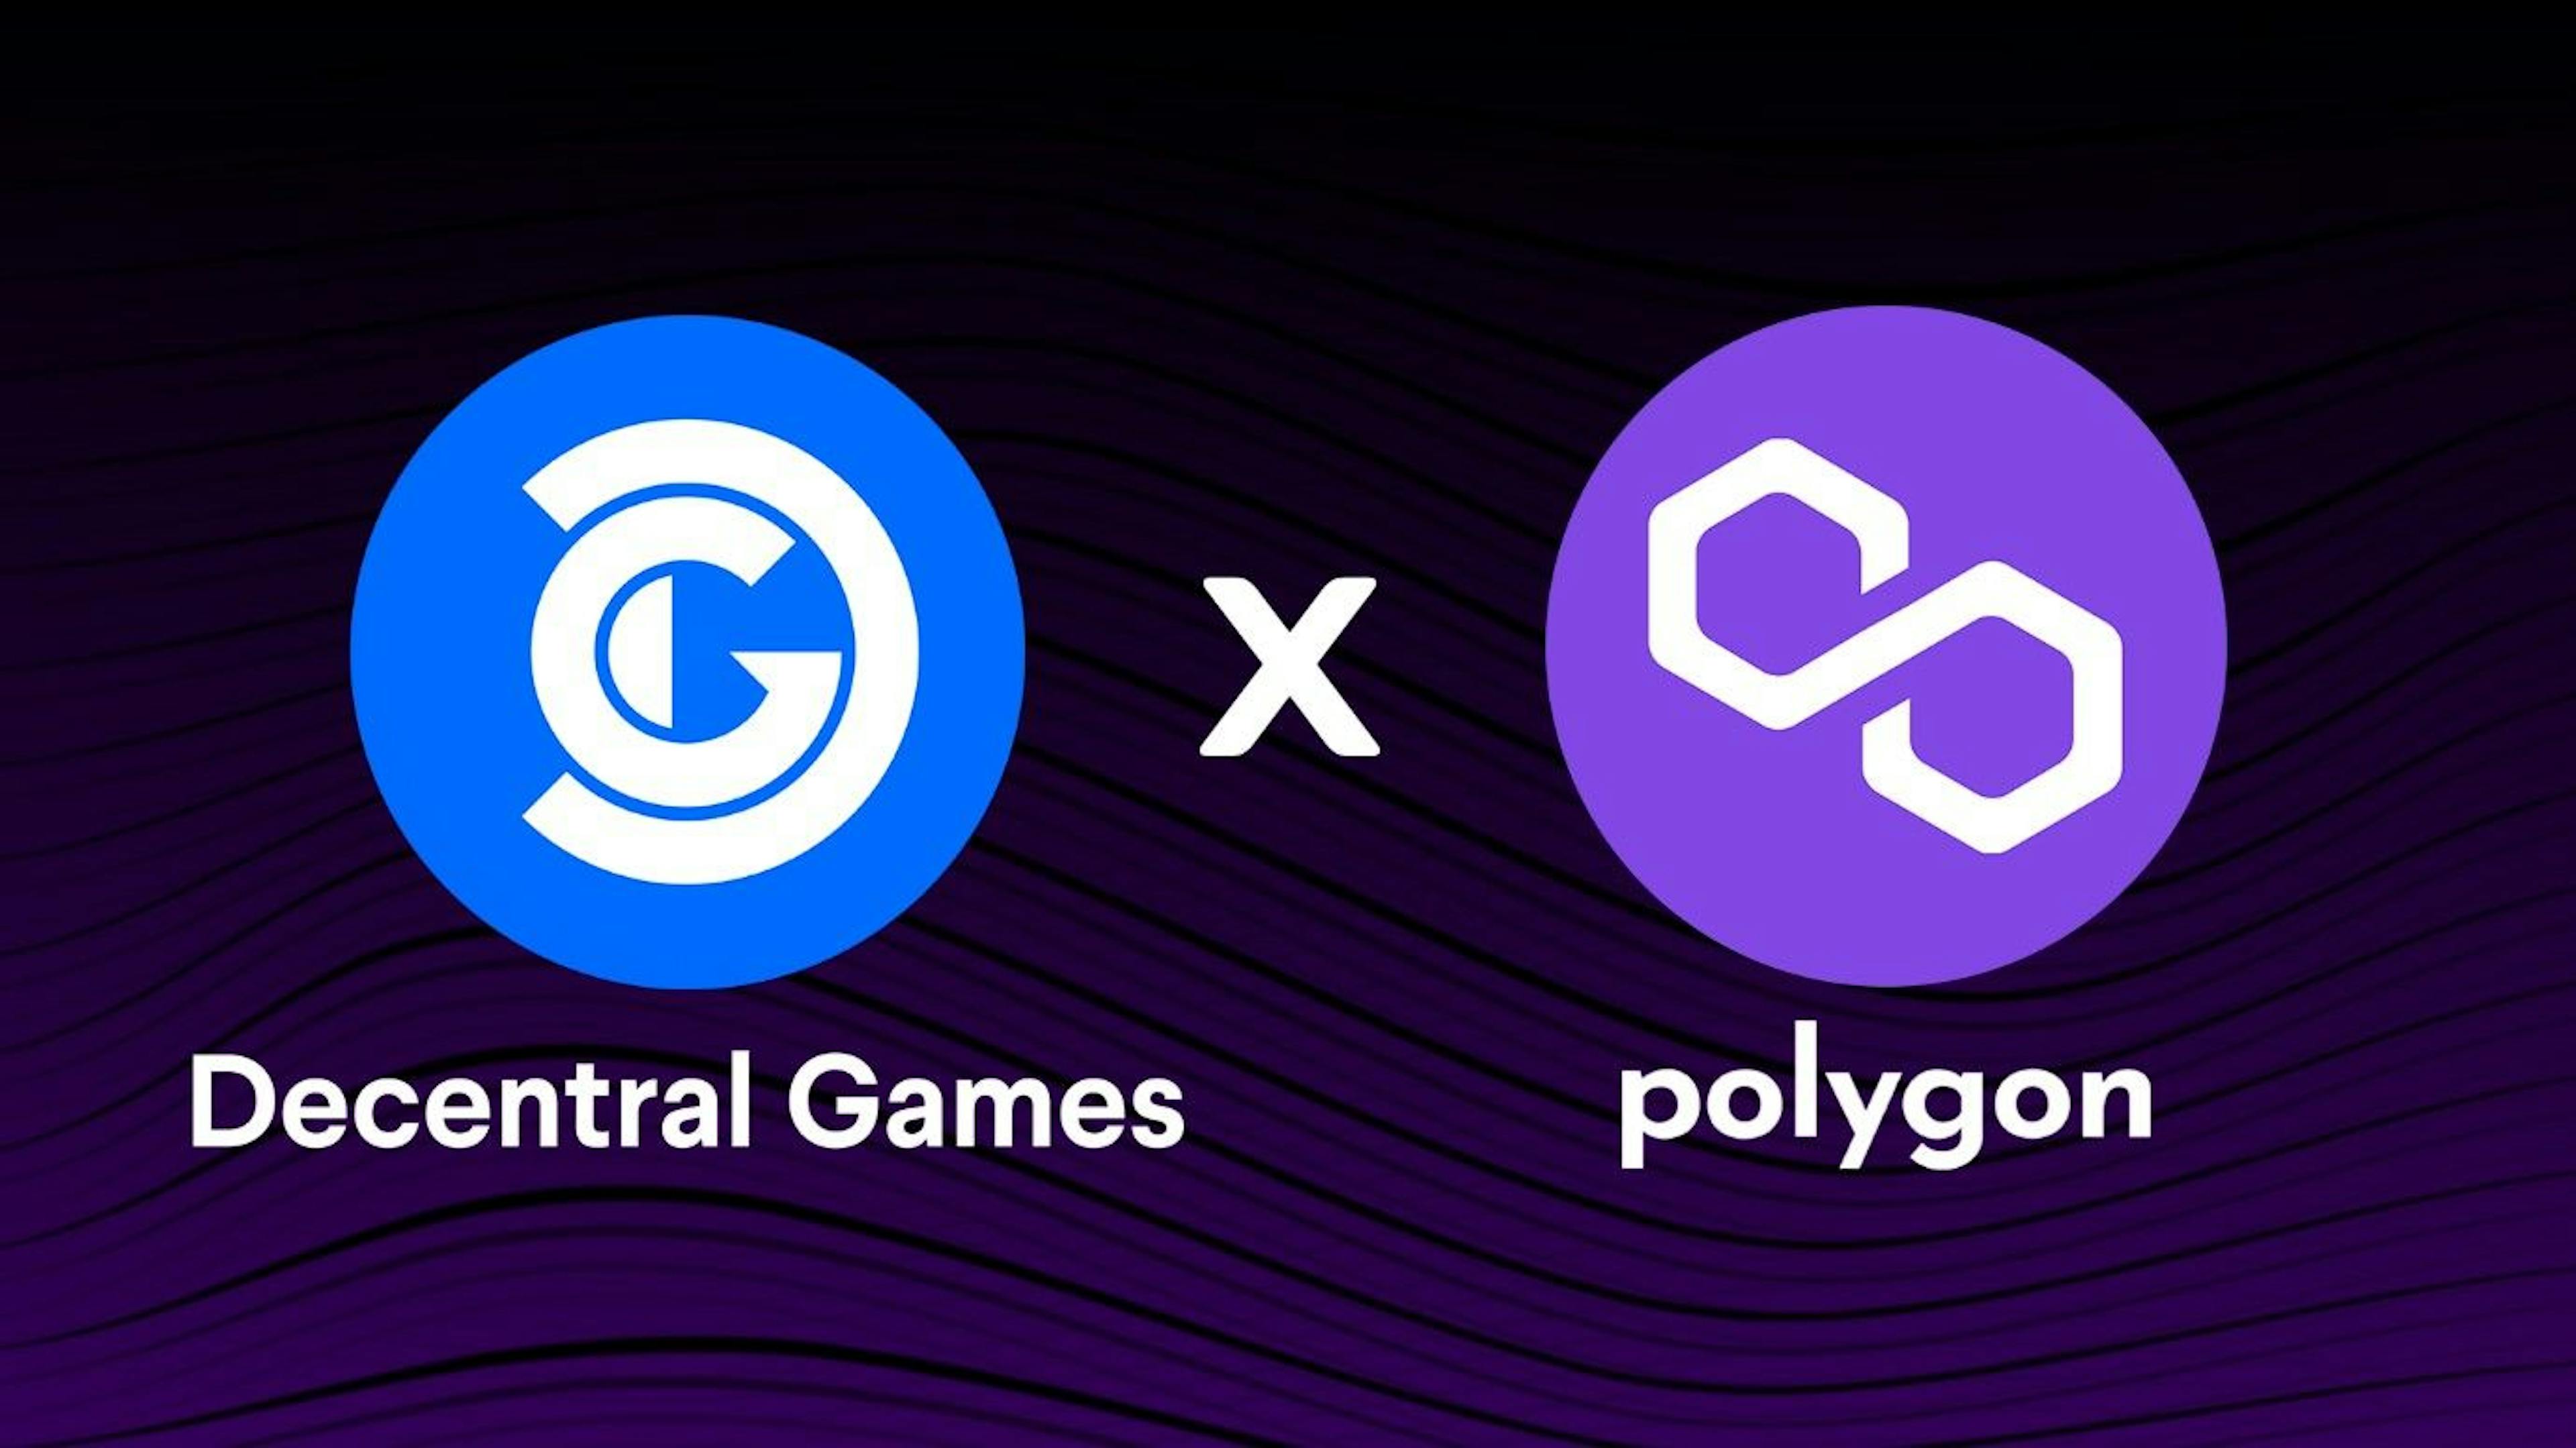 featured image - Decentral Games and Polygon Partner to Advance Play-to-Earn Metaverse Games